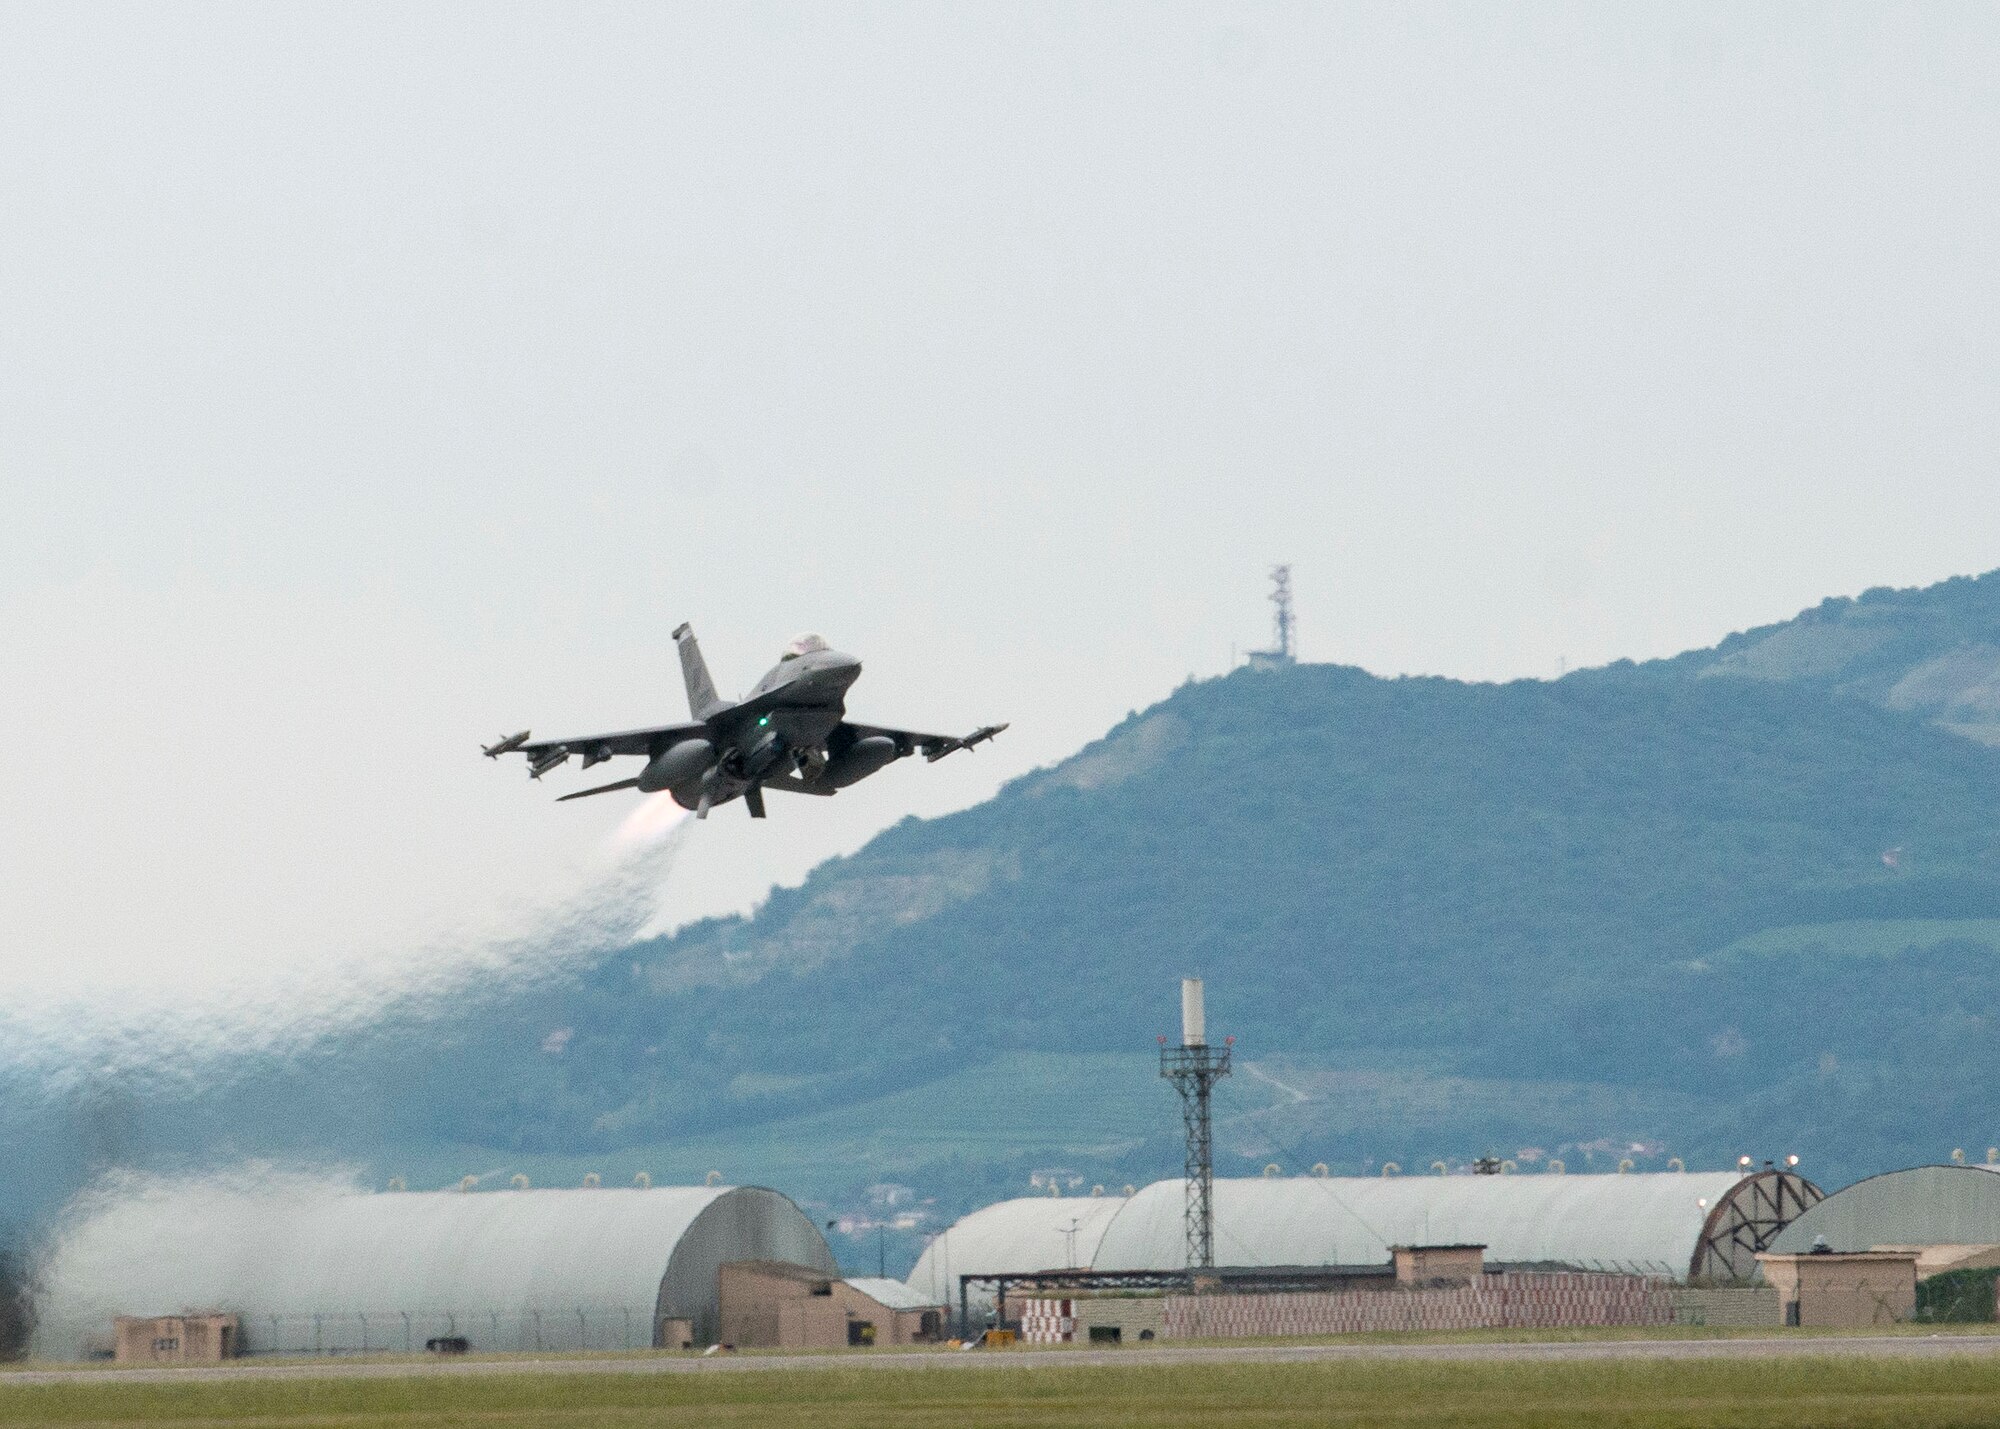 An F-16 Fighting Falcon from the 510th Fighter Squadron takes off from Aviano Air Base, Italy, Aug. 2, 2020. F-16s from the 510th FS flew integrated training missions alongside the USS Porter in the Black Sea which were designed to train U.S. forces to operate while executing multi-domain operations. (U.S. Air Force photo by Tech. Sgt. Rebeccah Woodrow)